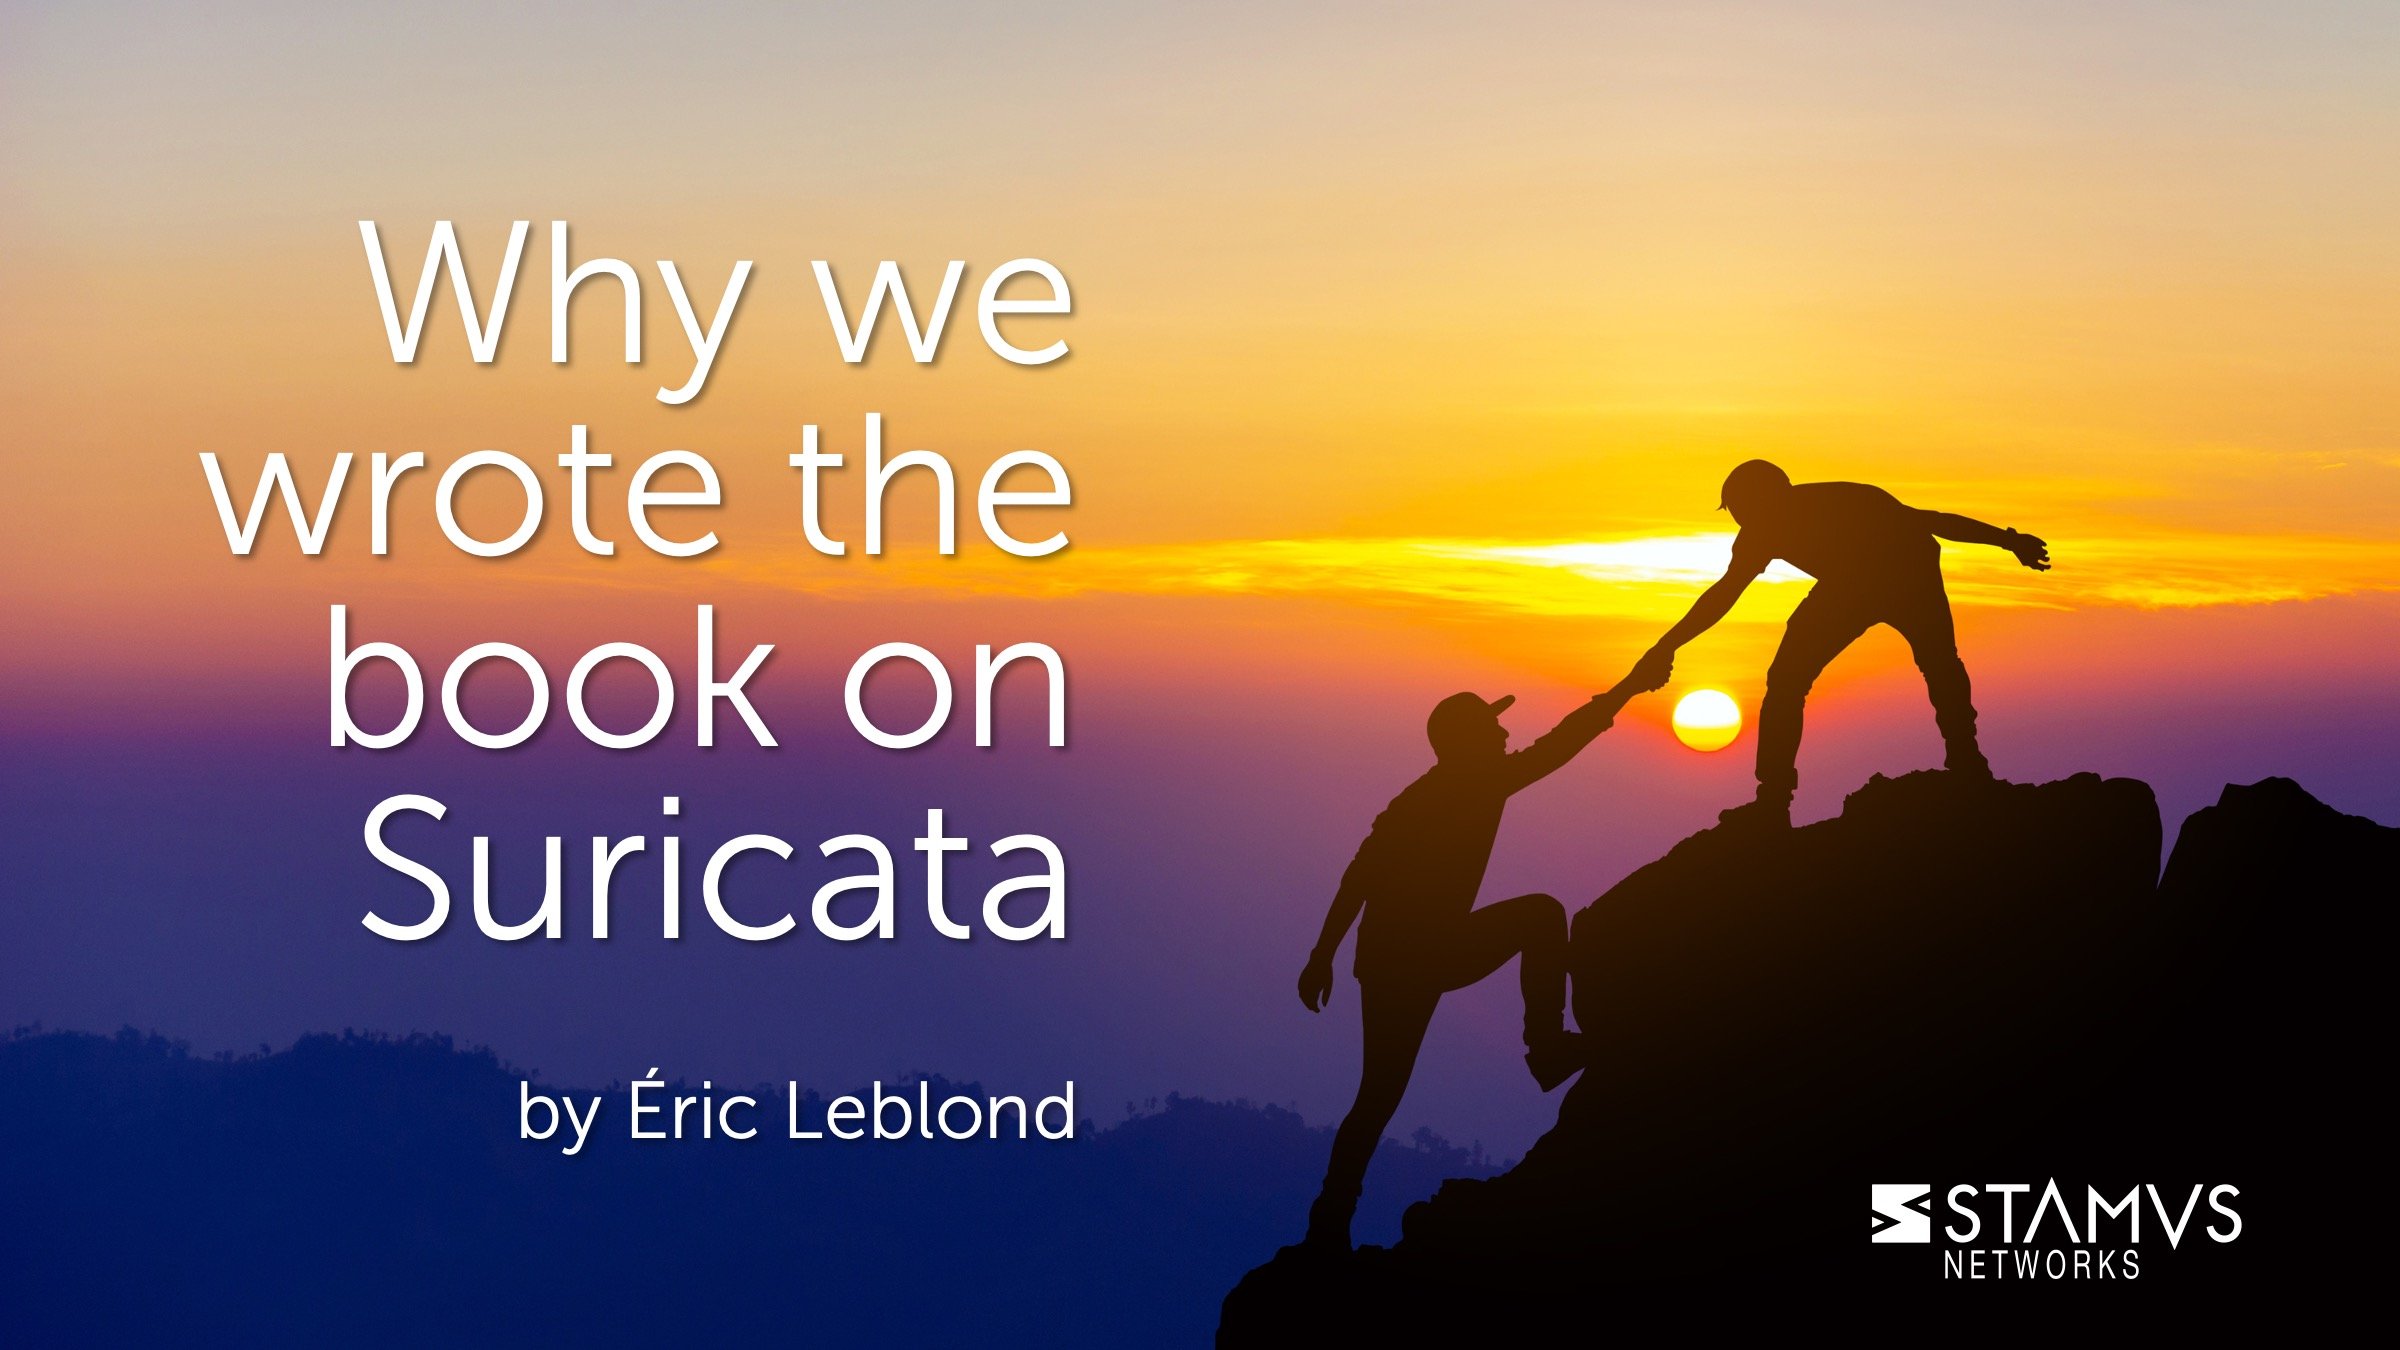 Why We Wrote the Book on Suricata by Eric Leblond